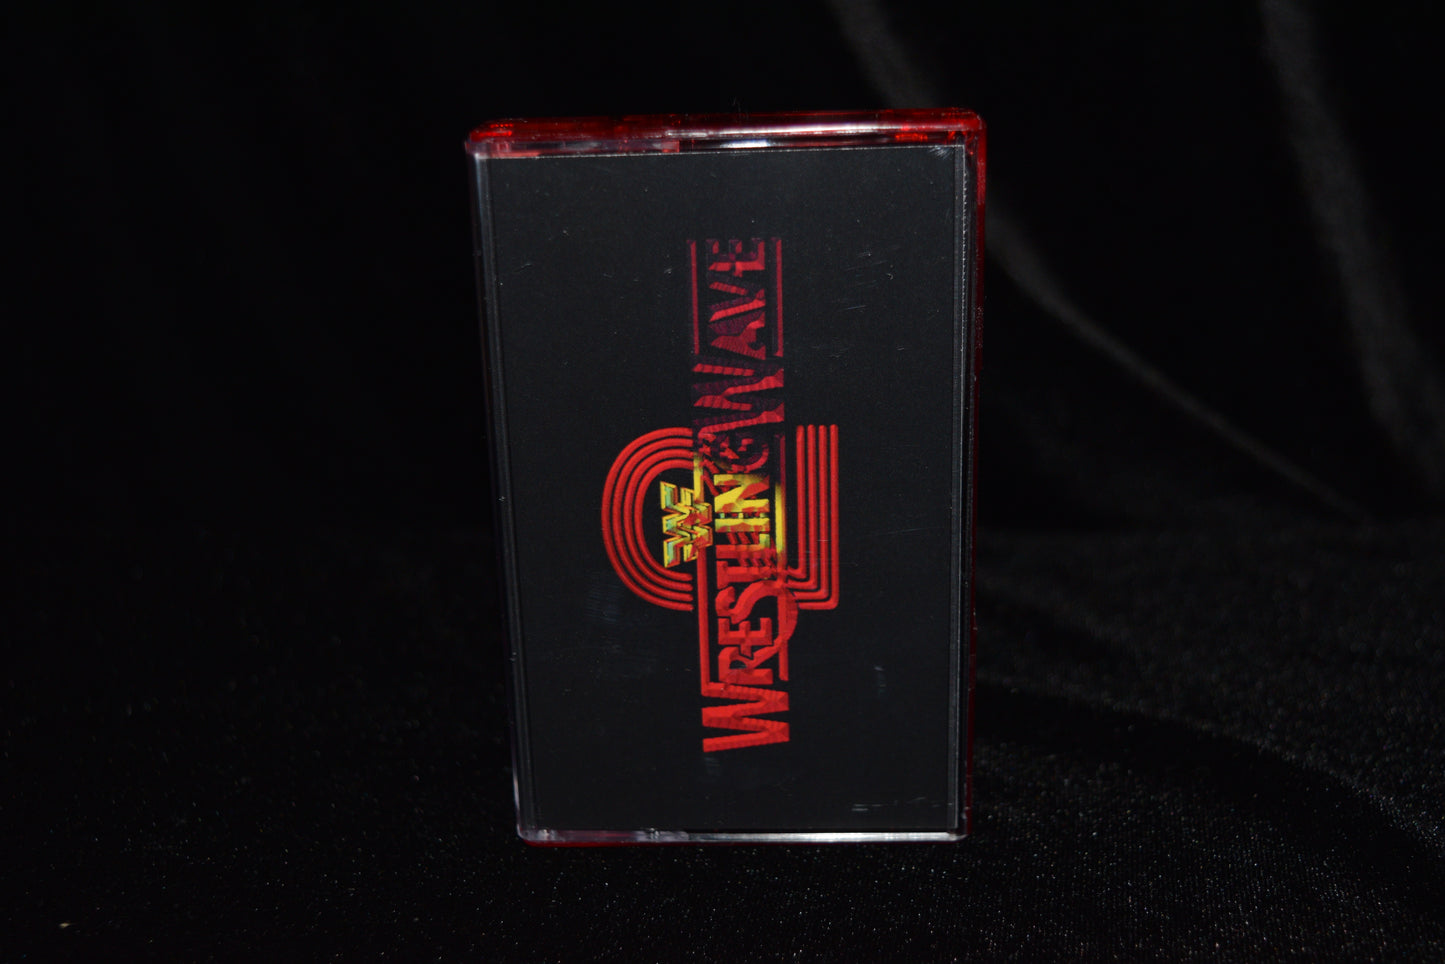 Wrestling Wave 2 Limited Through The Black Curtain Edition Cassette